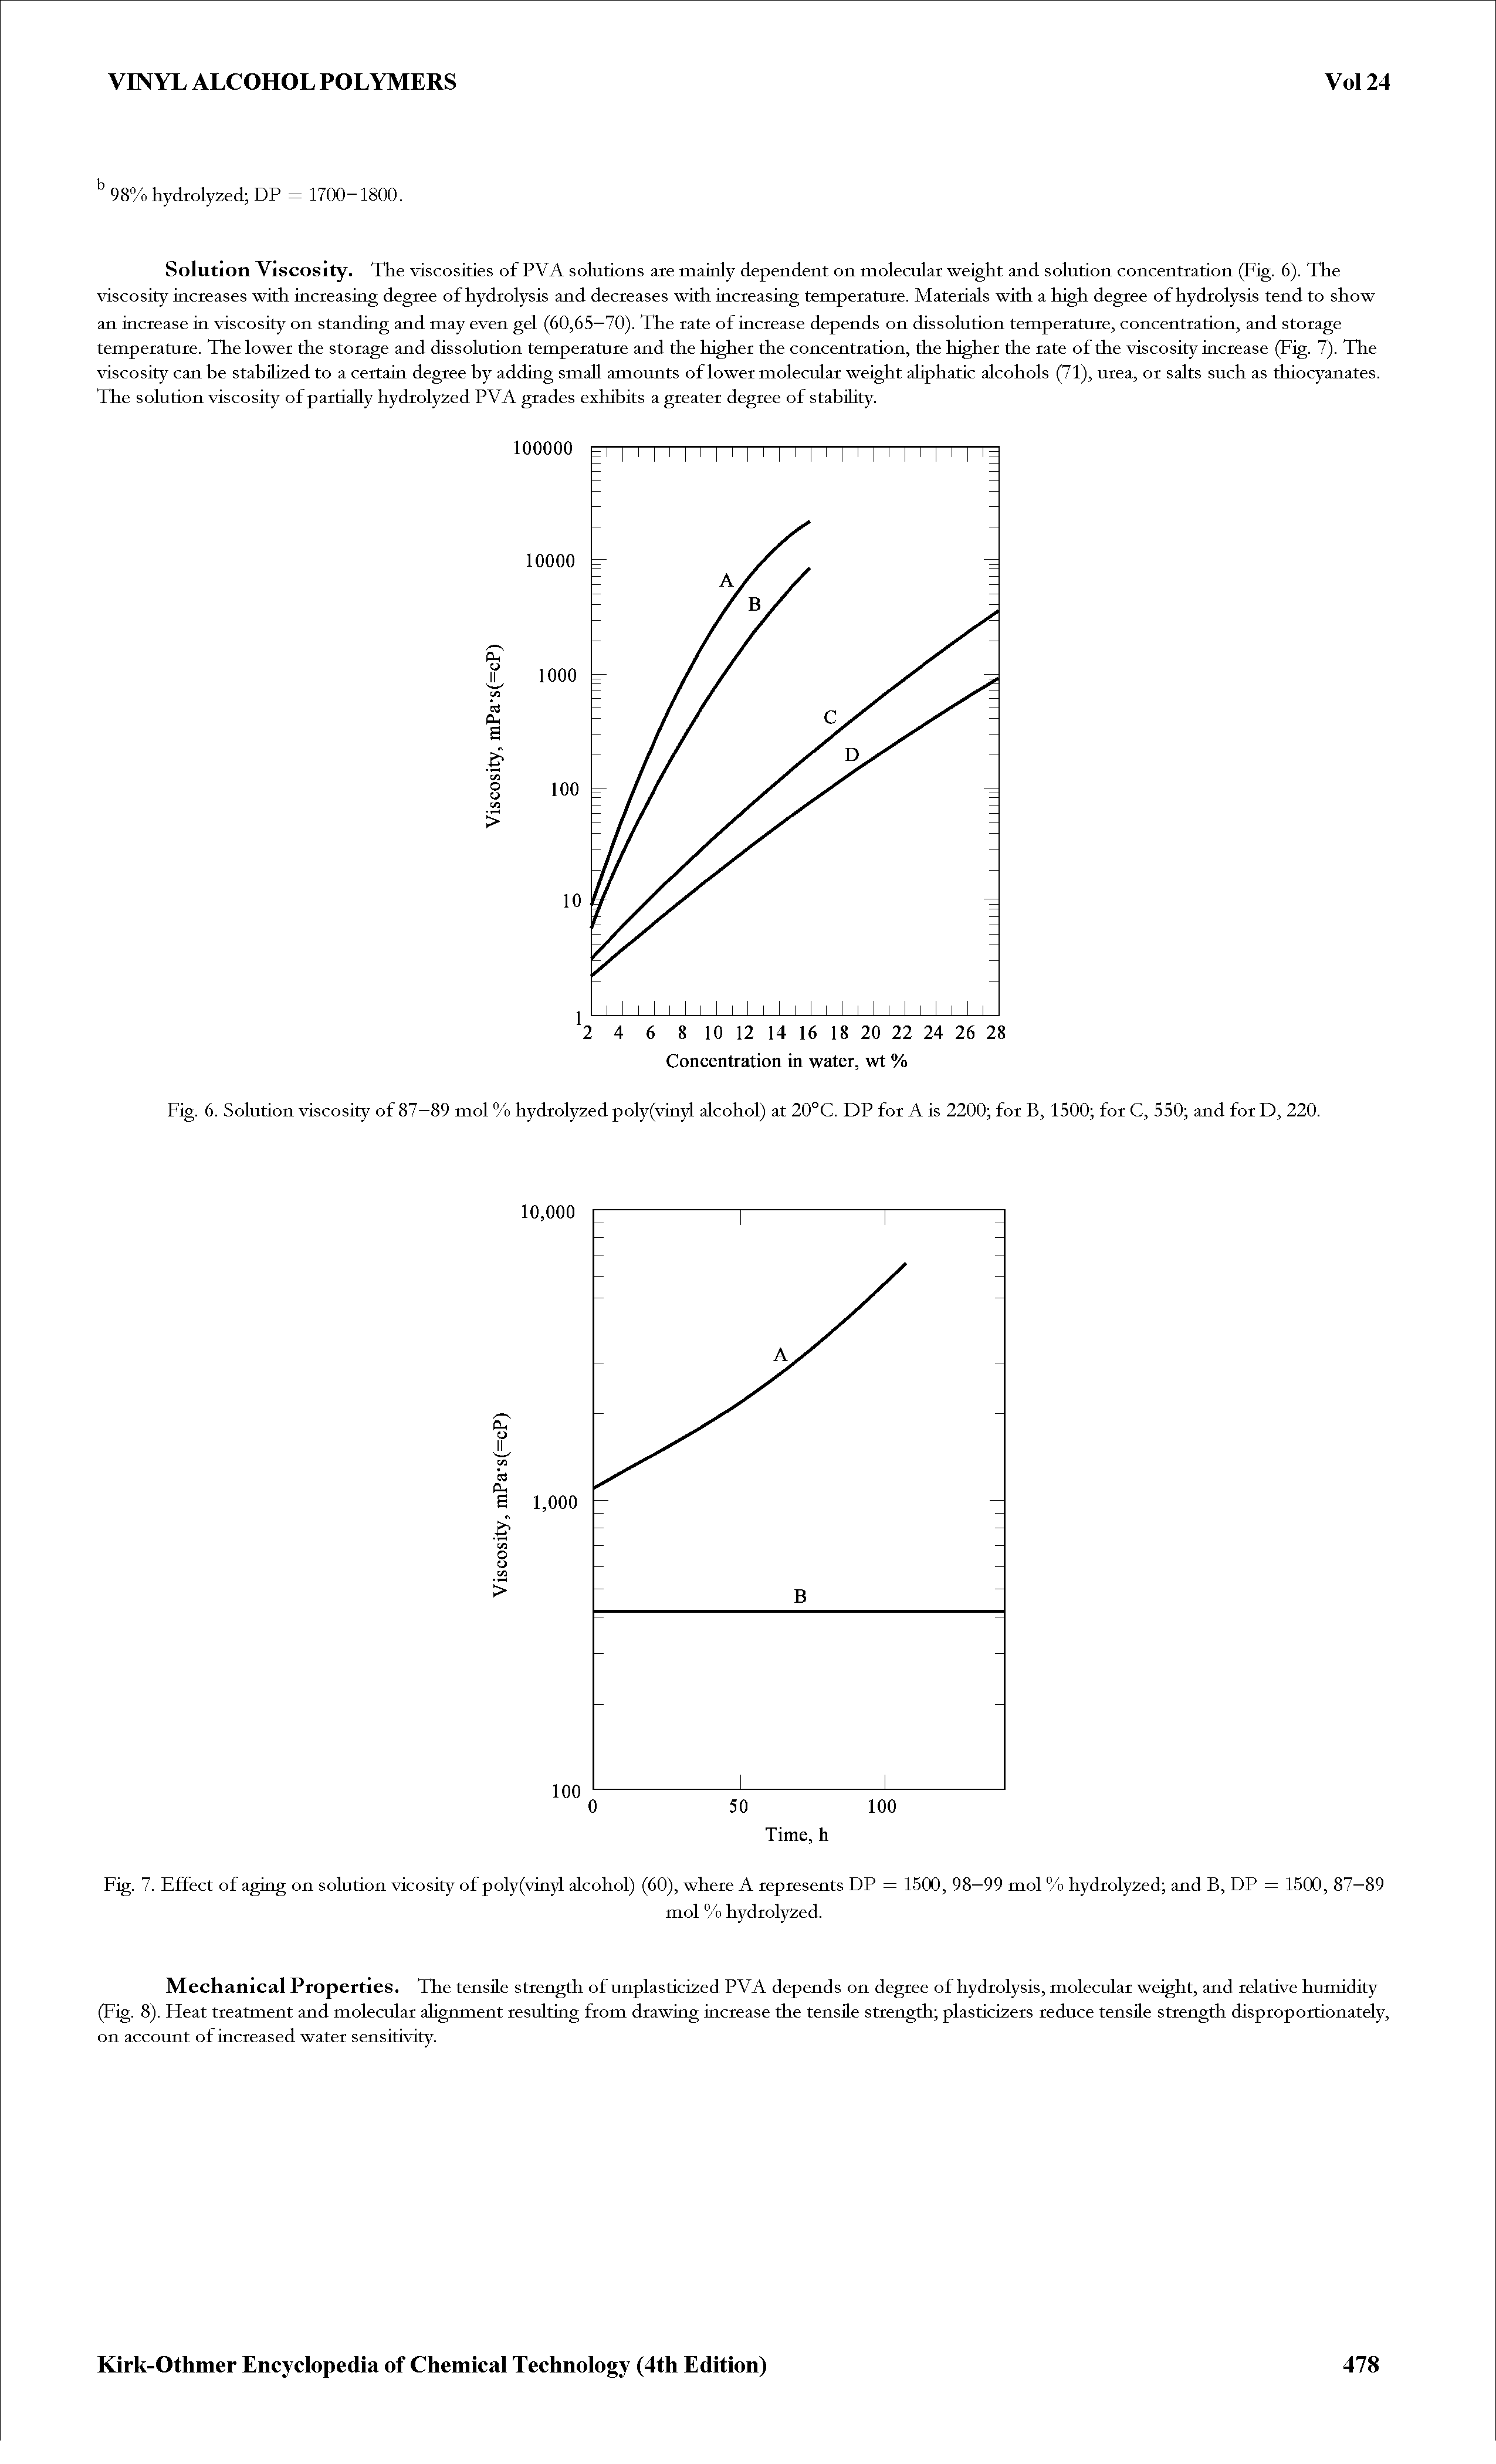 Fig. 7. Effect of aging on solution vicosity of poly(vinyl alcohol) (60), where A represents DP = 1500, 98—99 mol % hydrolyzed and B, DP = 1500, 87—89...